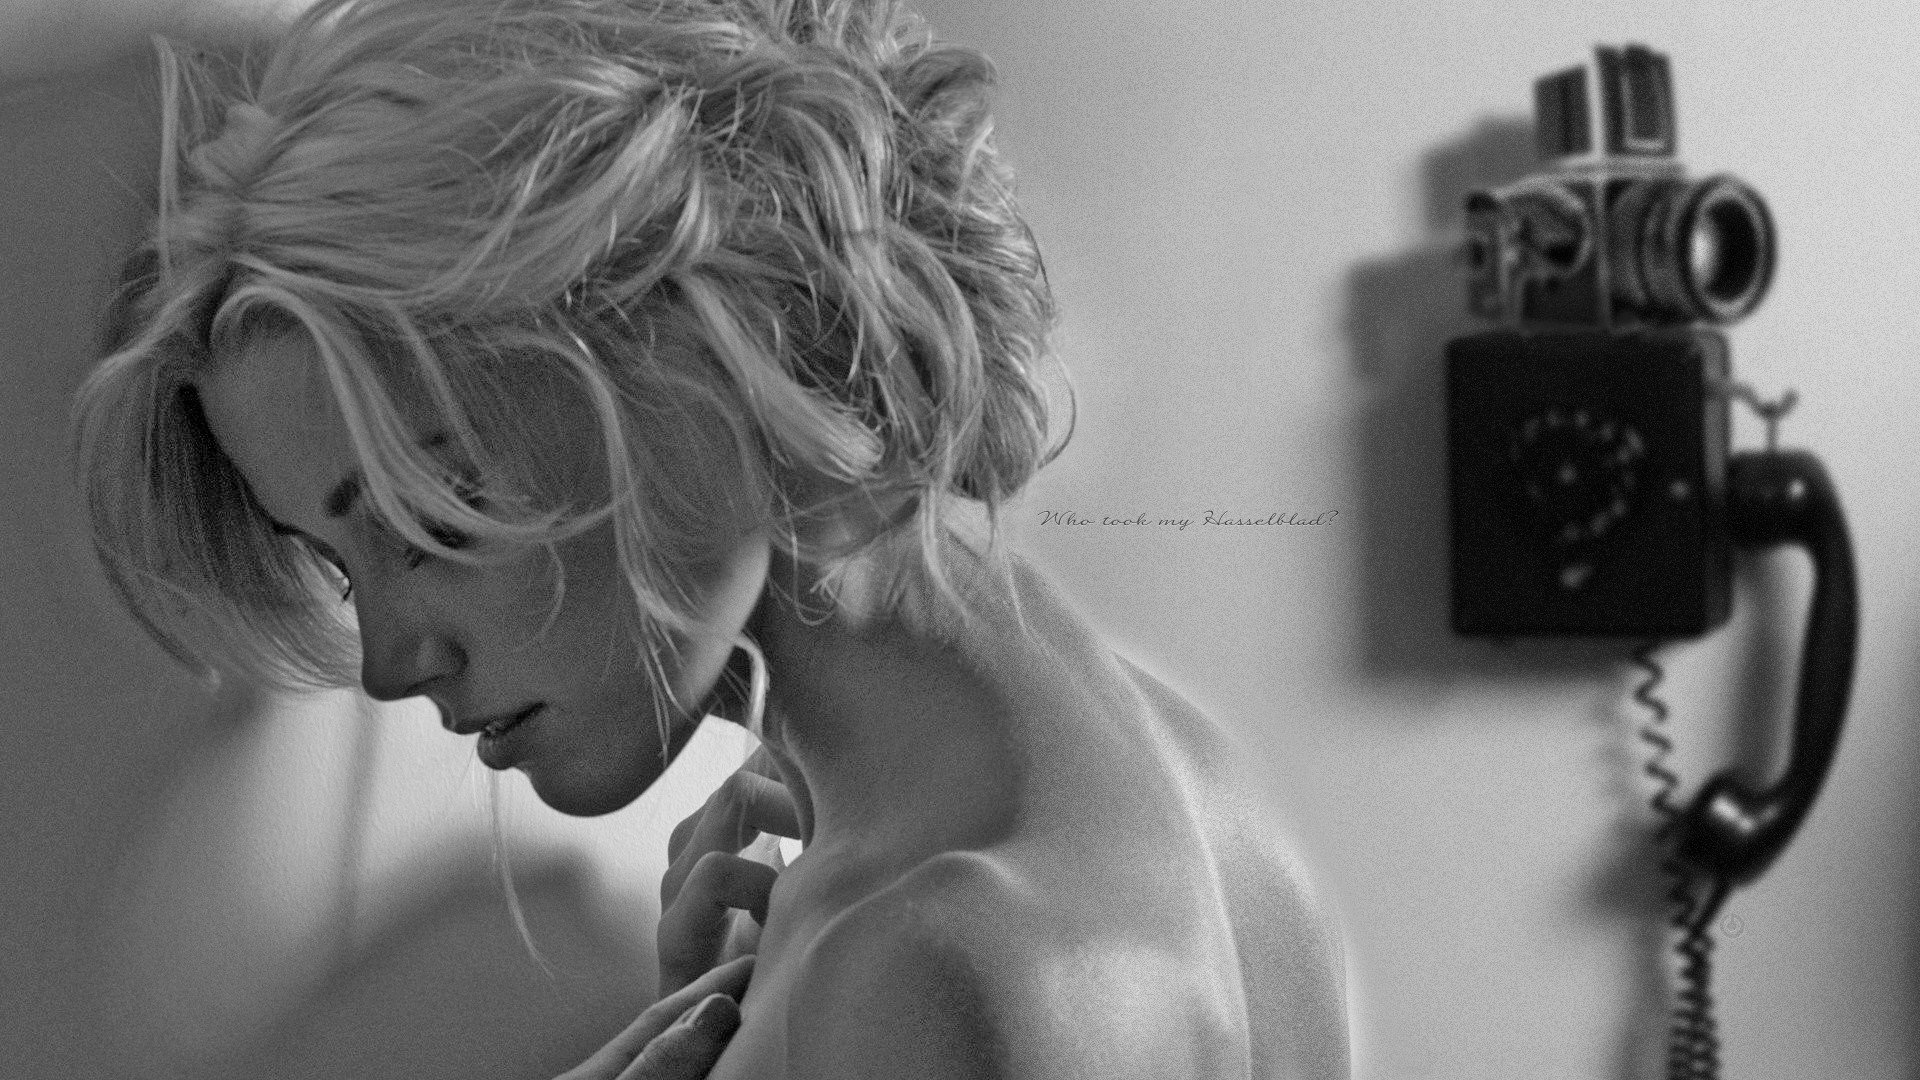 People 1920x1080 Amber Heard monochrome blonde bare shoulders face side view blurred phone actress women photo manipulation women indoors indoors